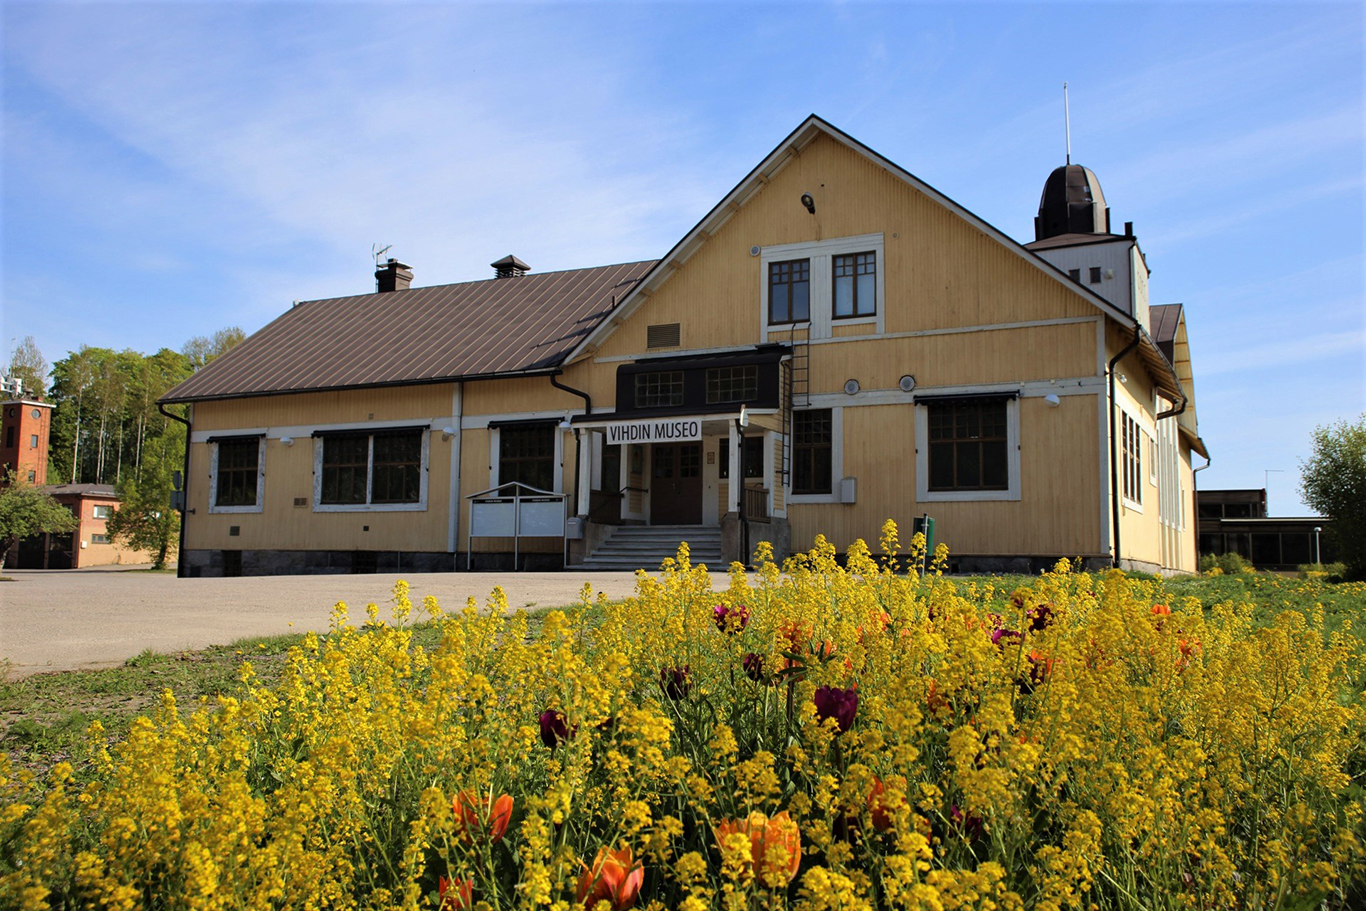 A flower garden in the foreground, a yellow Art Nouveau wooden building in the background.